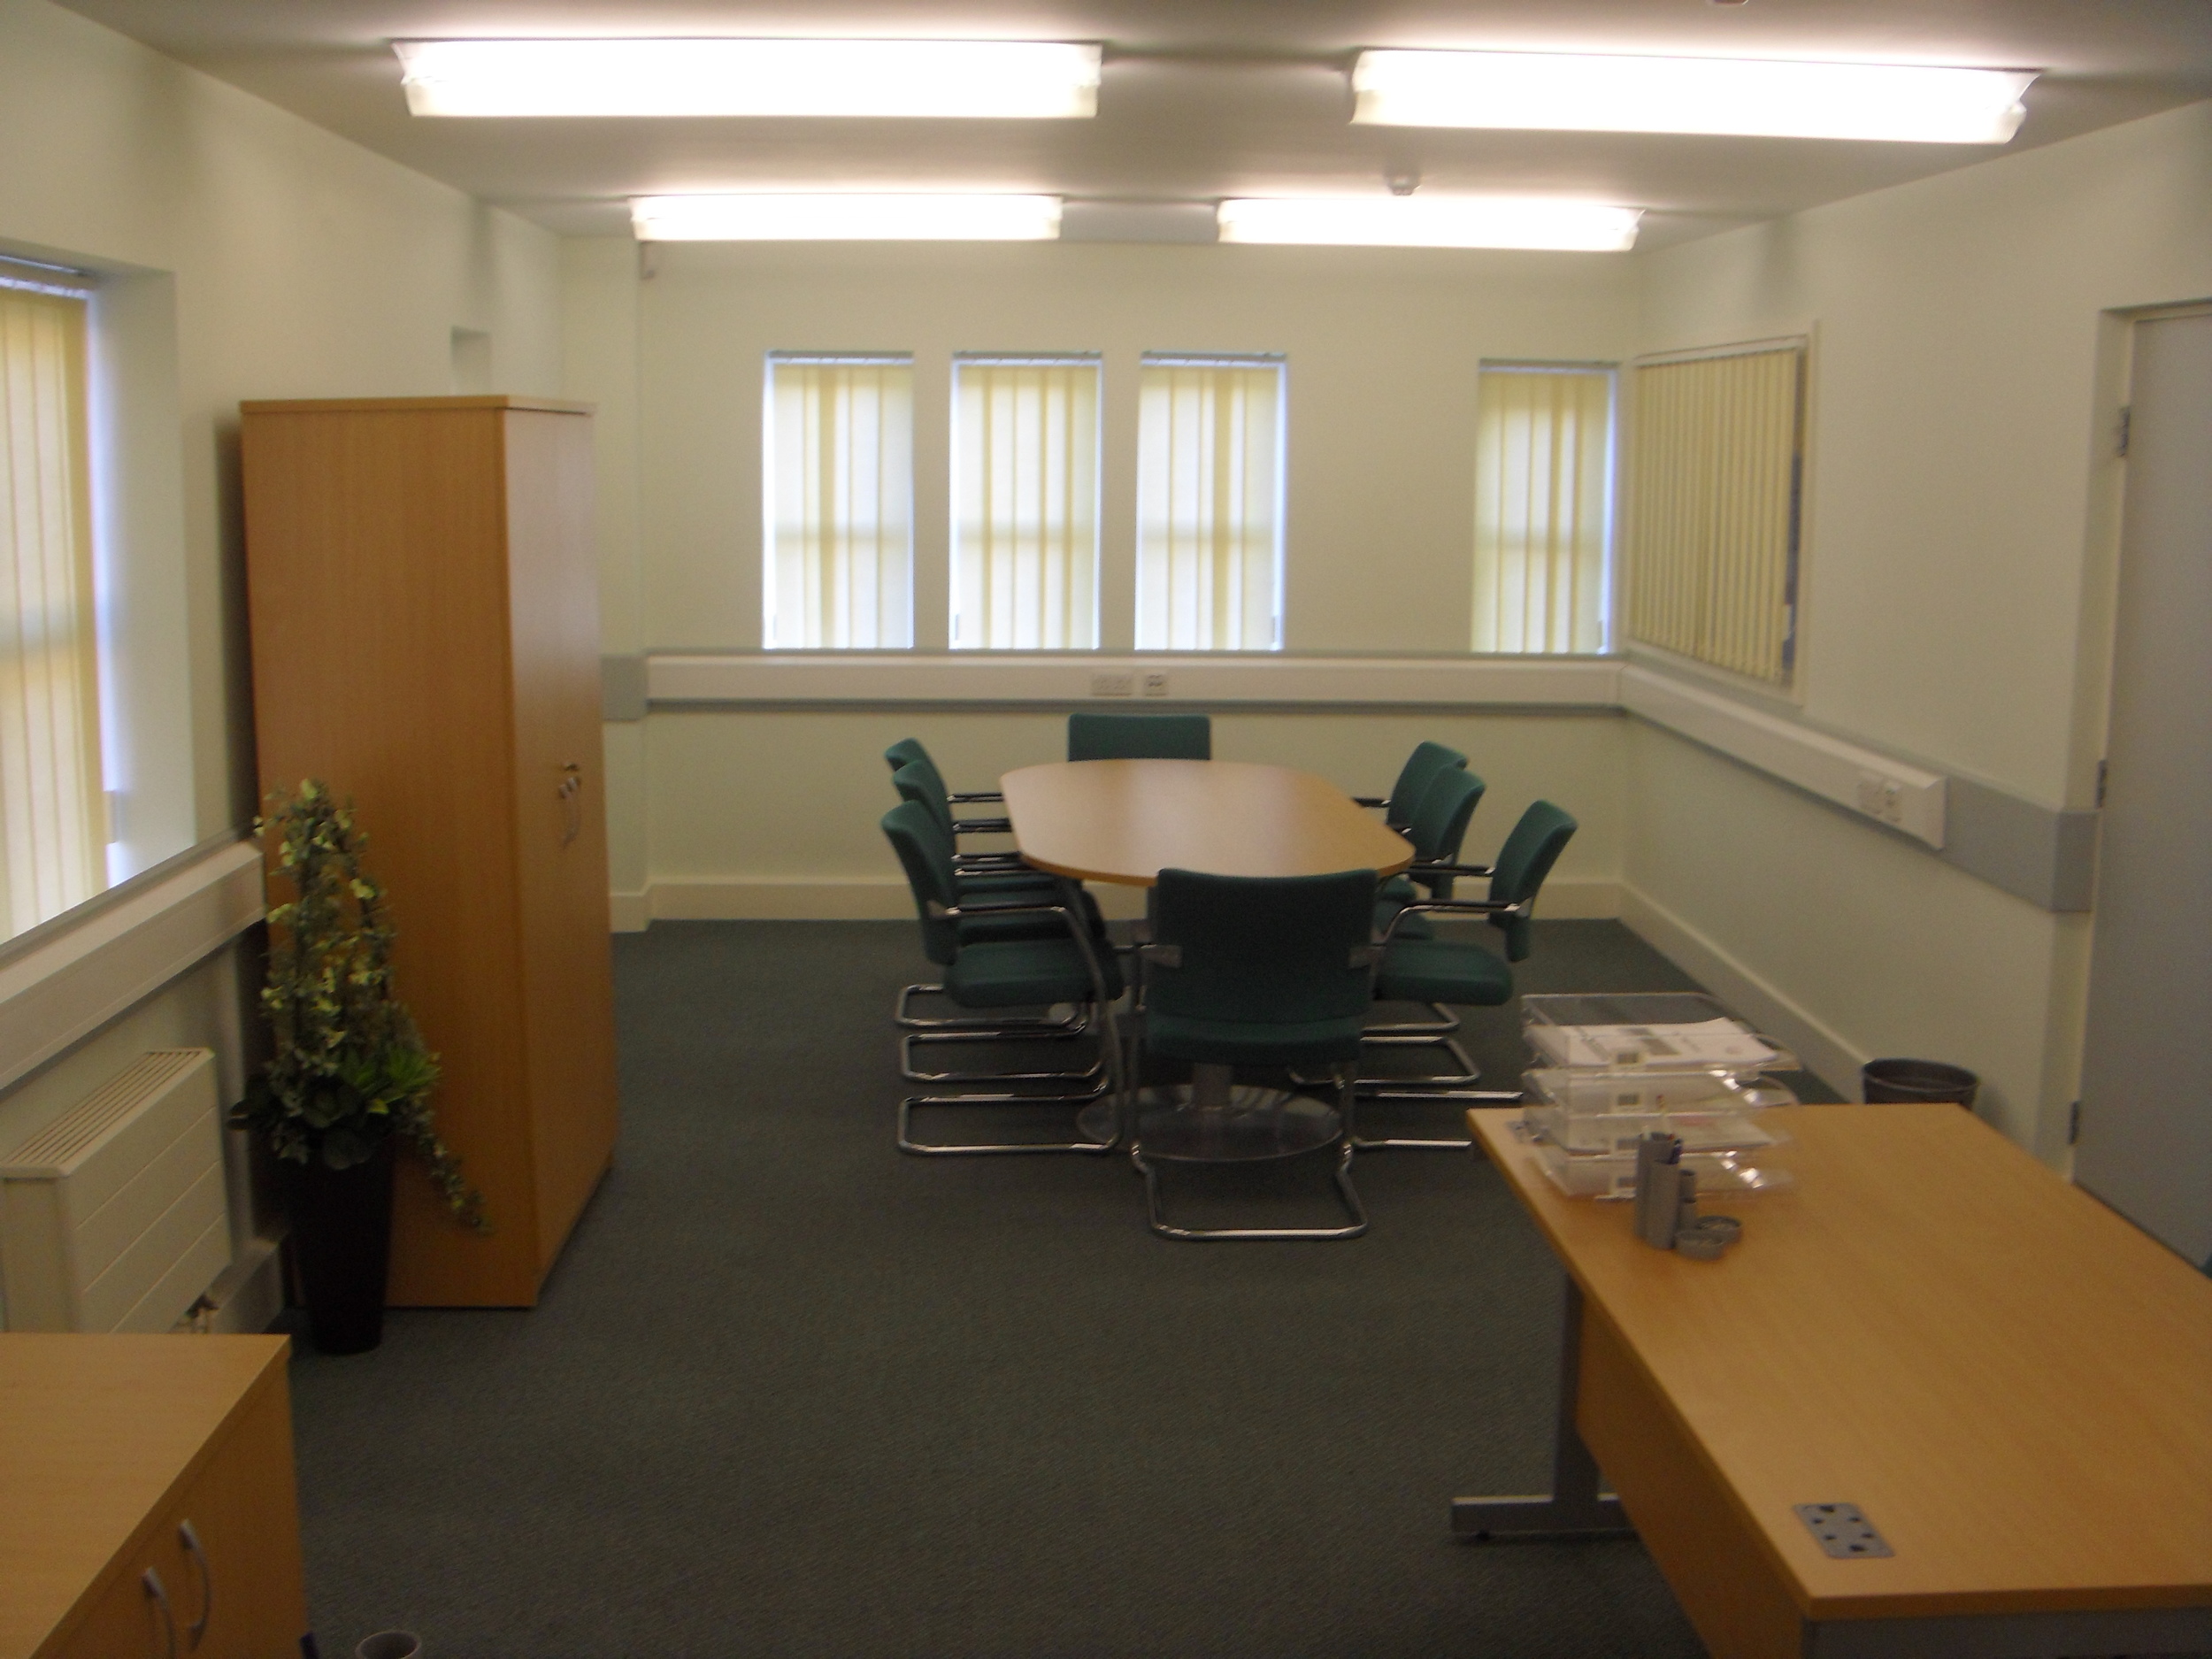   High Quality Office Space To Let   Swinton, Worsley 